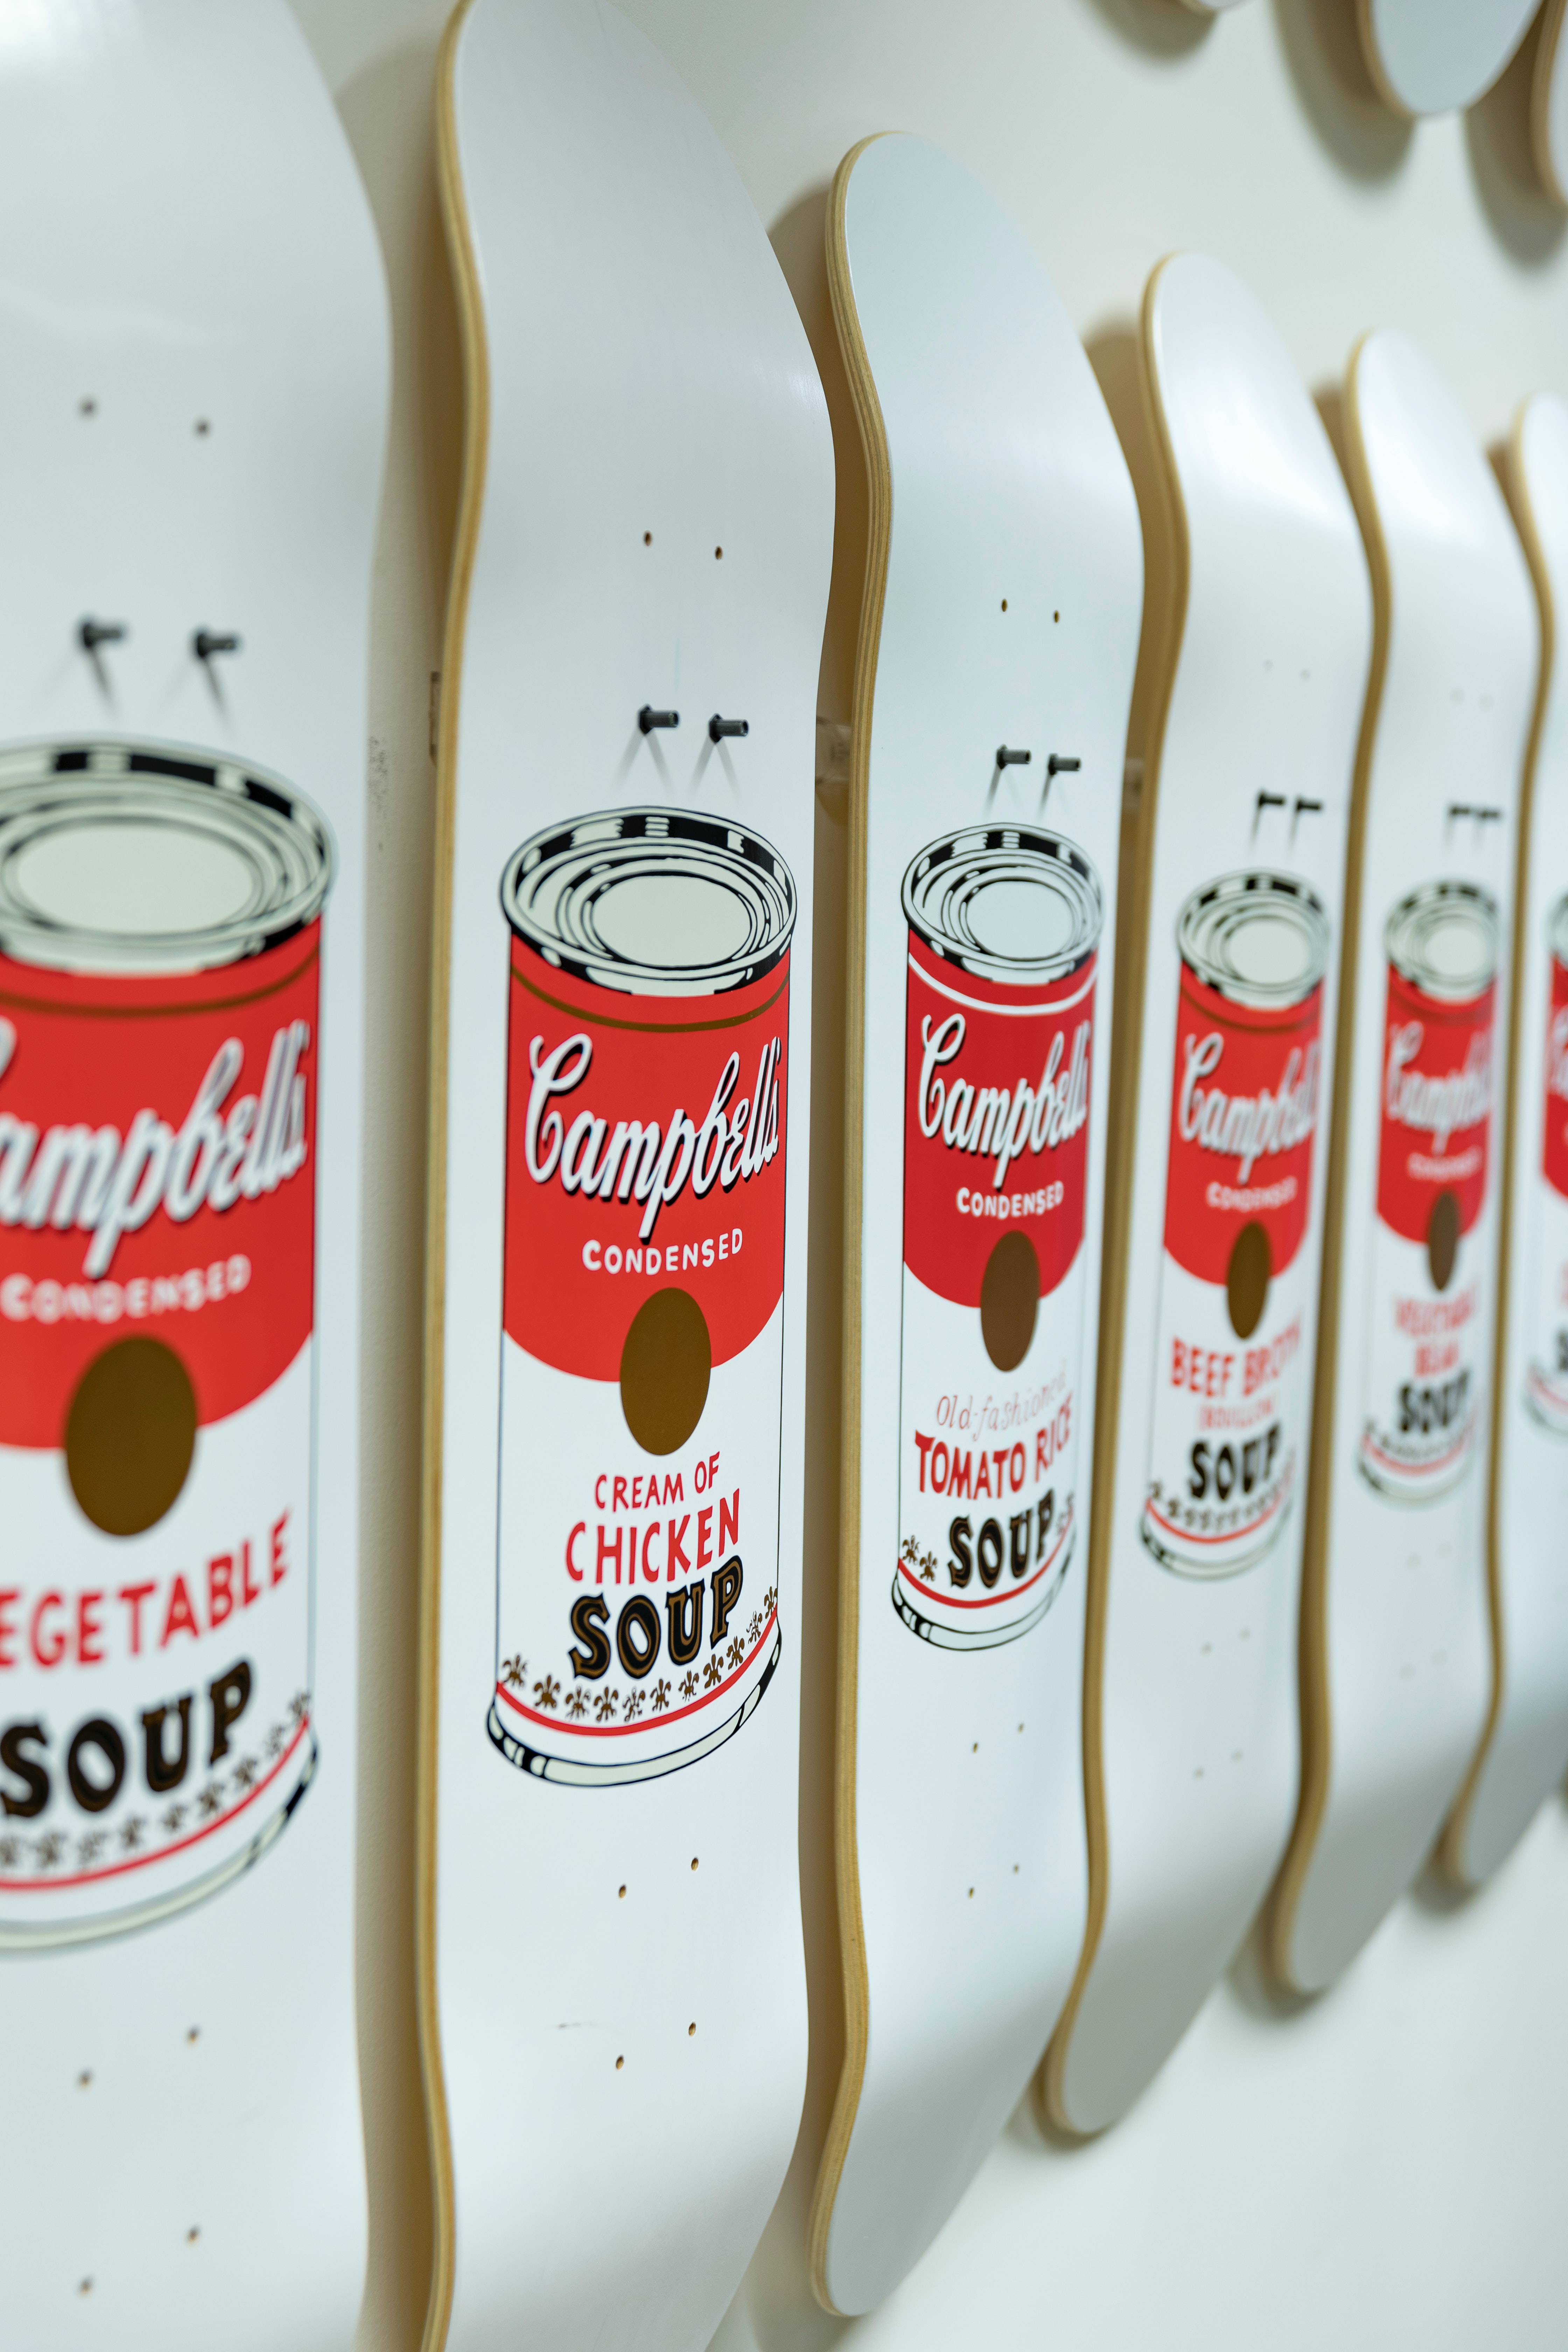 Warhol Campbell's soup cans